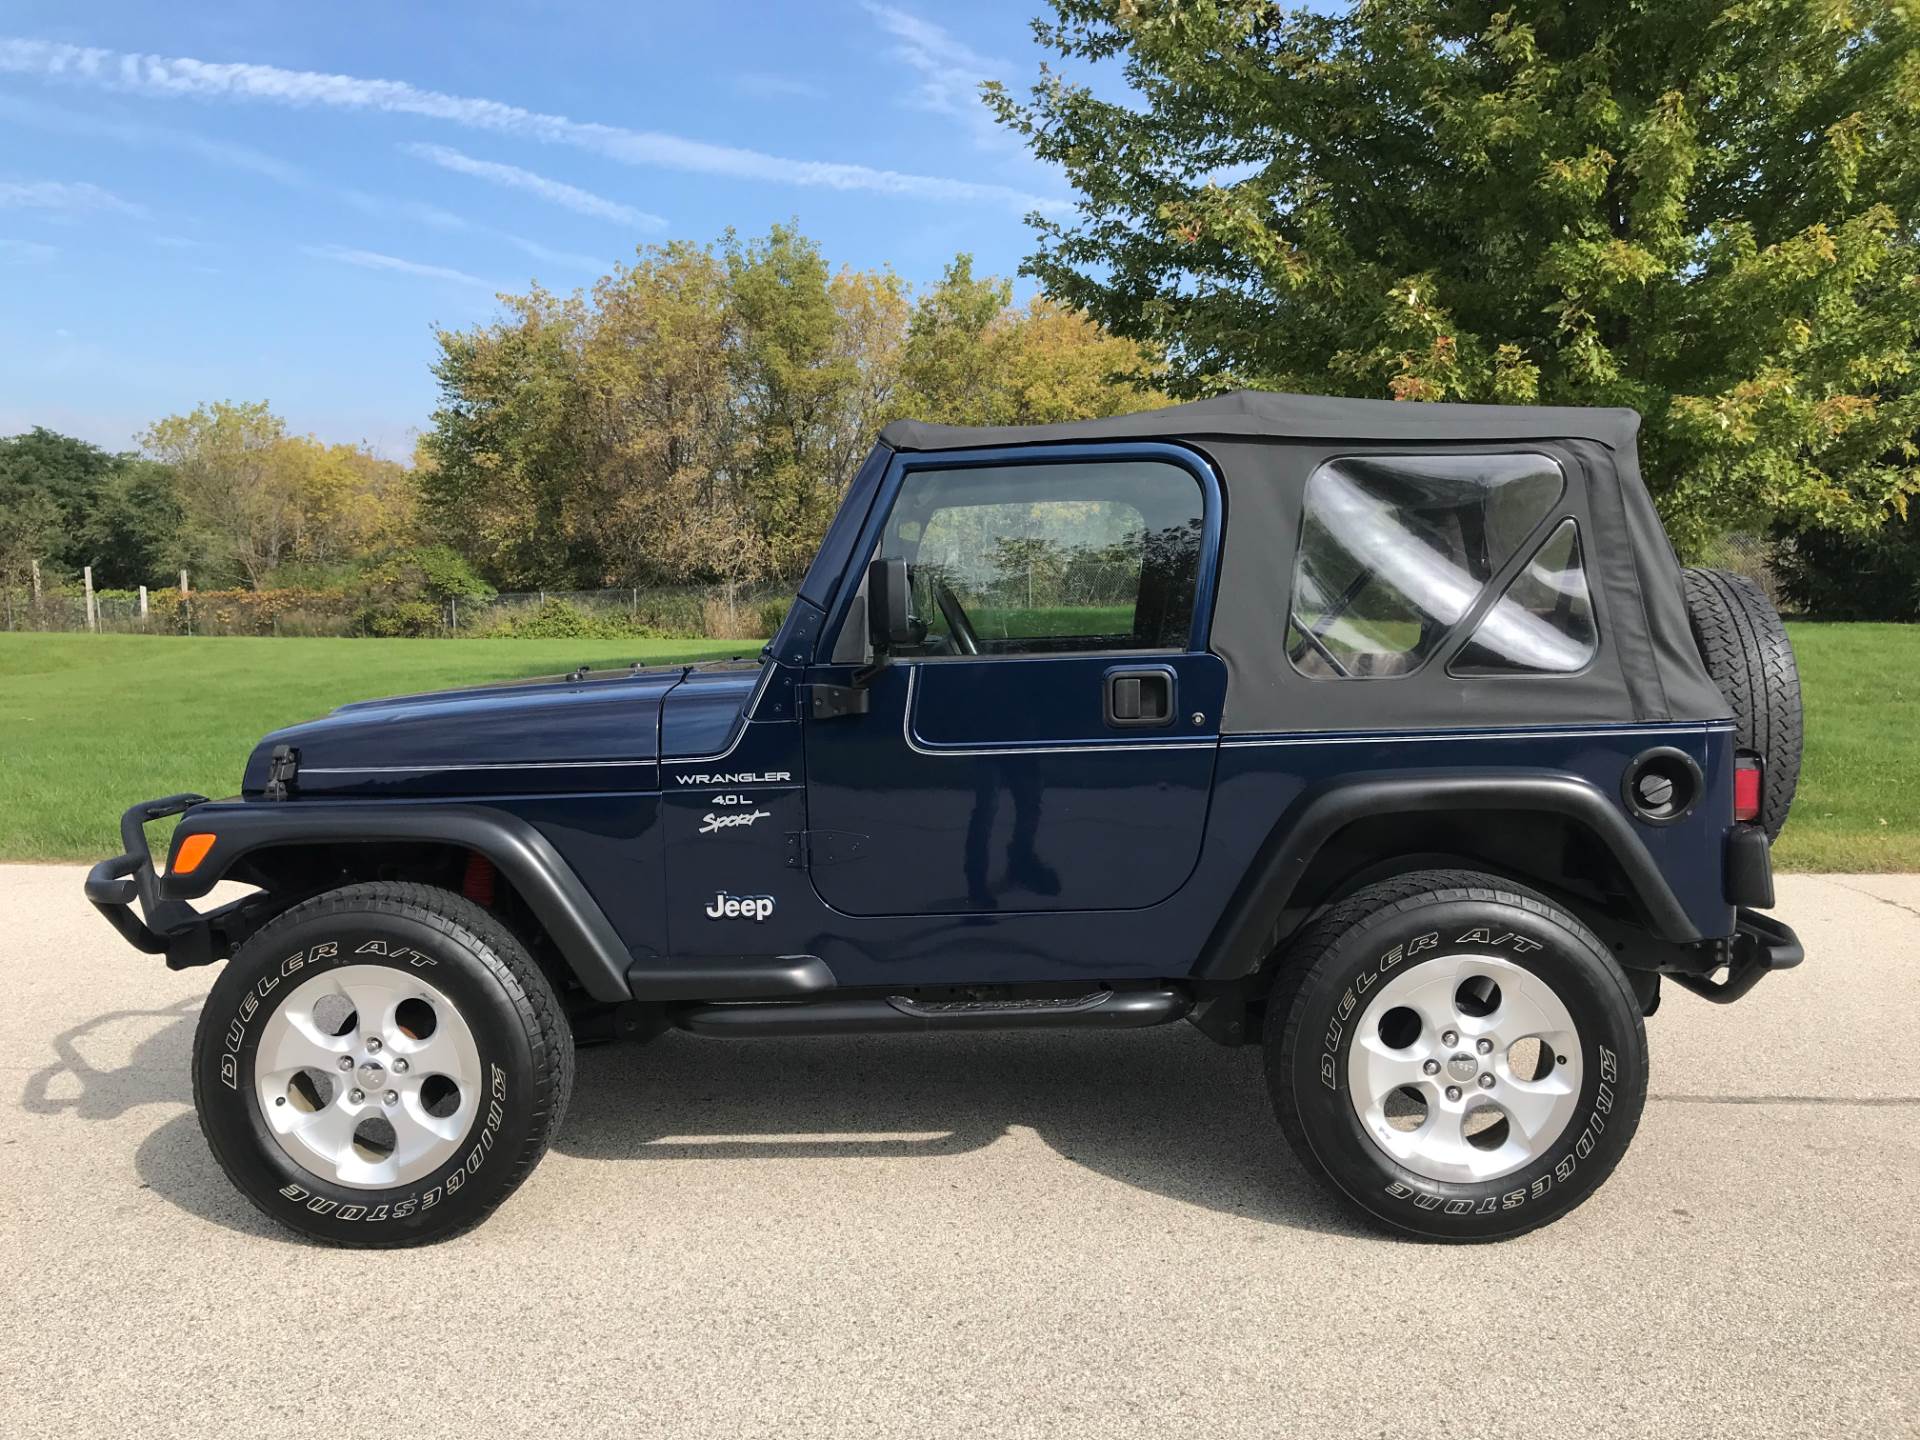 2000 Jeep Wrangler Sport 2dr 4WD SUV in Big Bend, Wisconsin - Photo 19